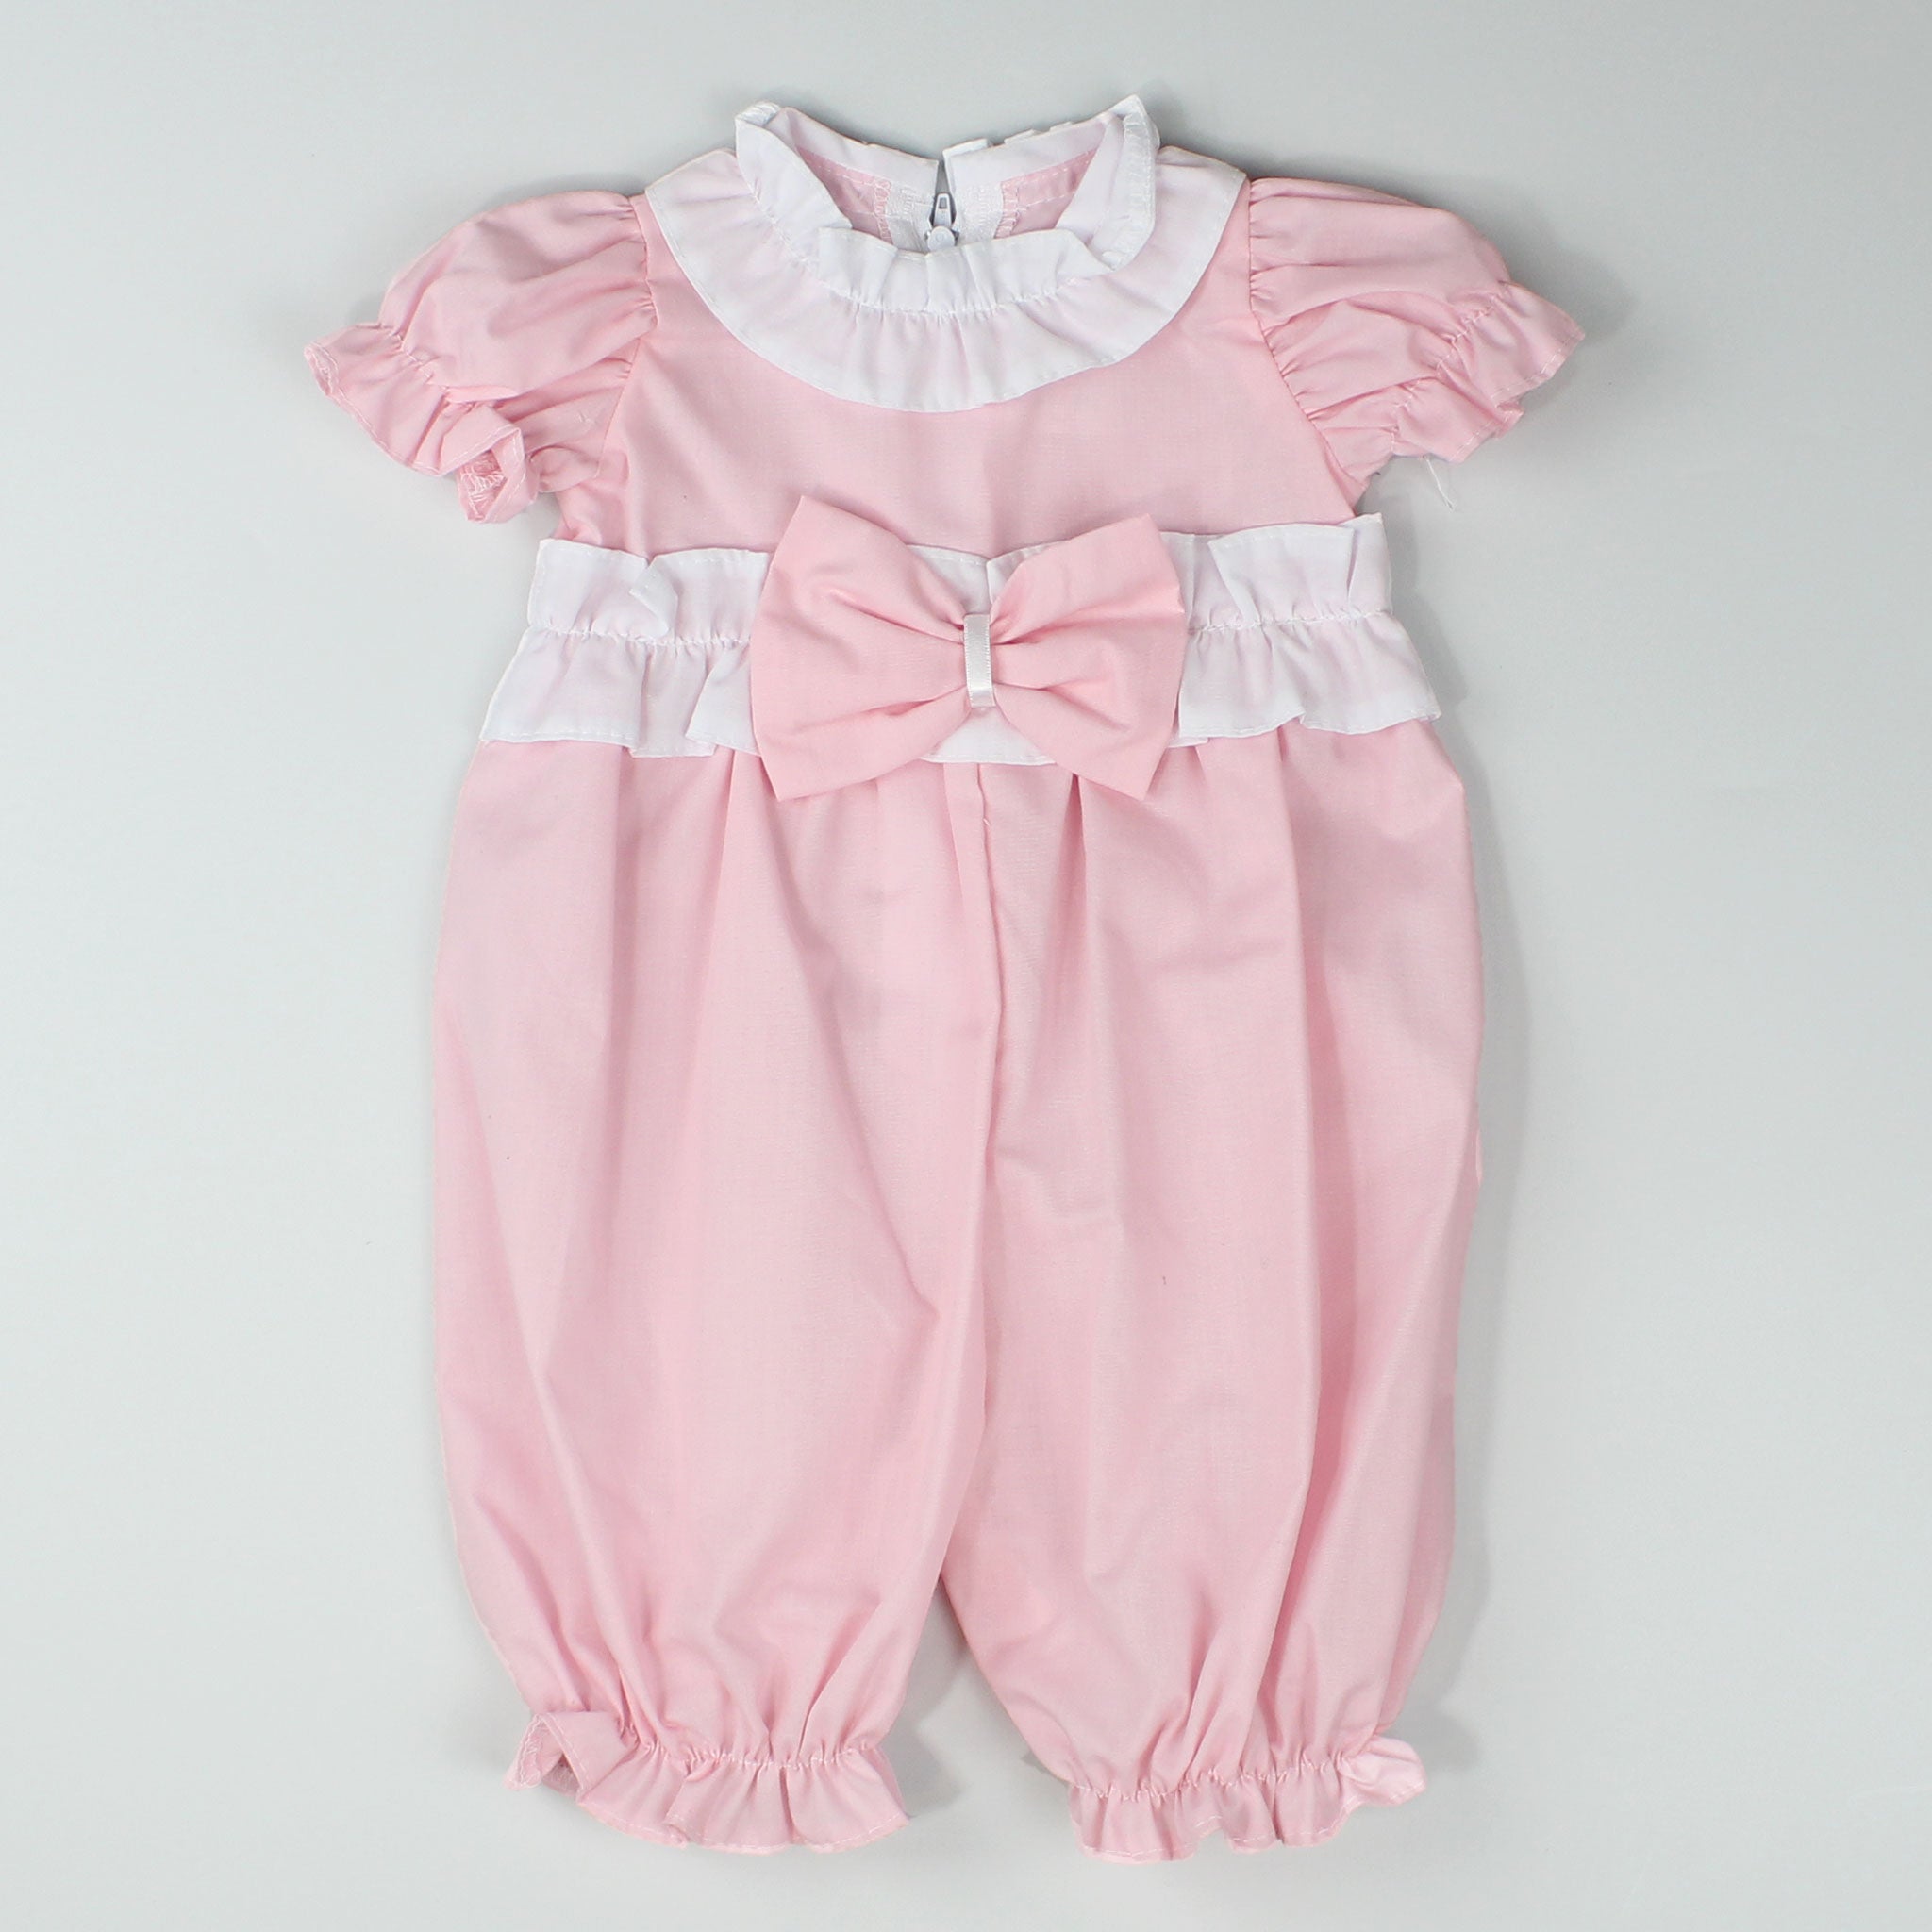 baby girls romper in pink with bow for summer